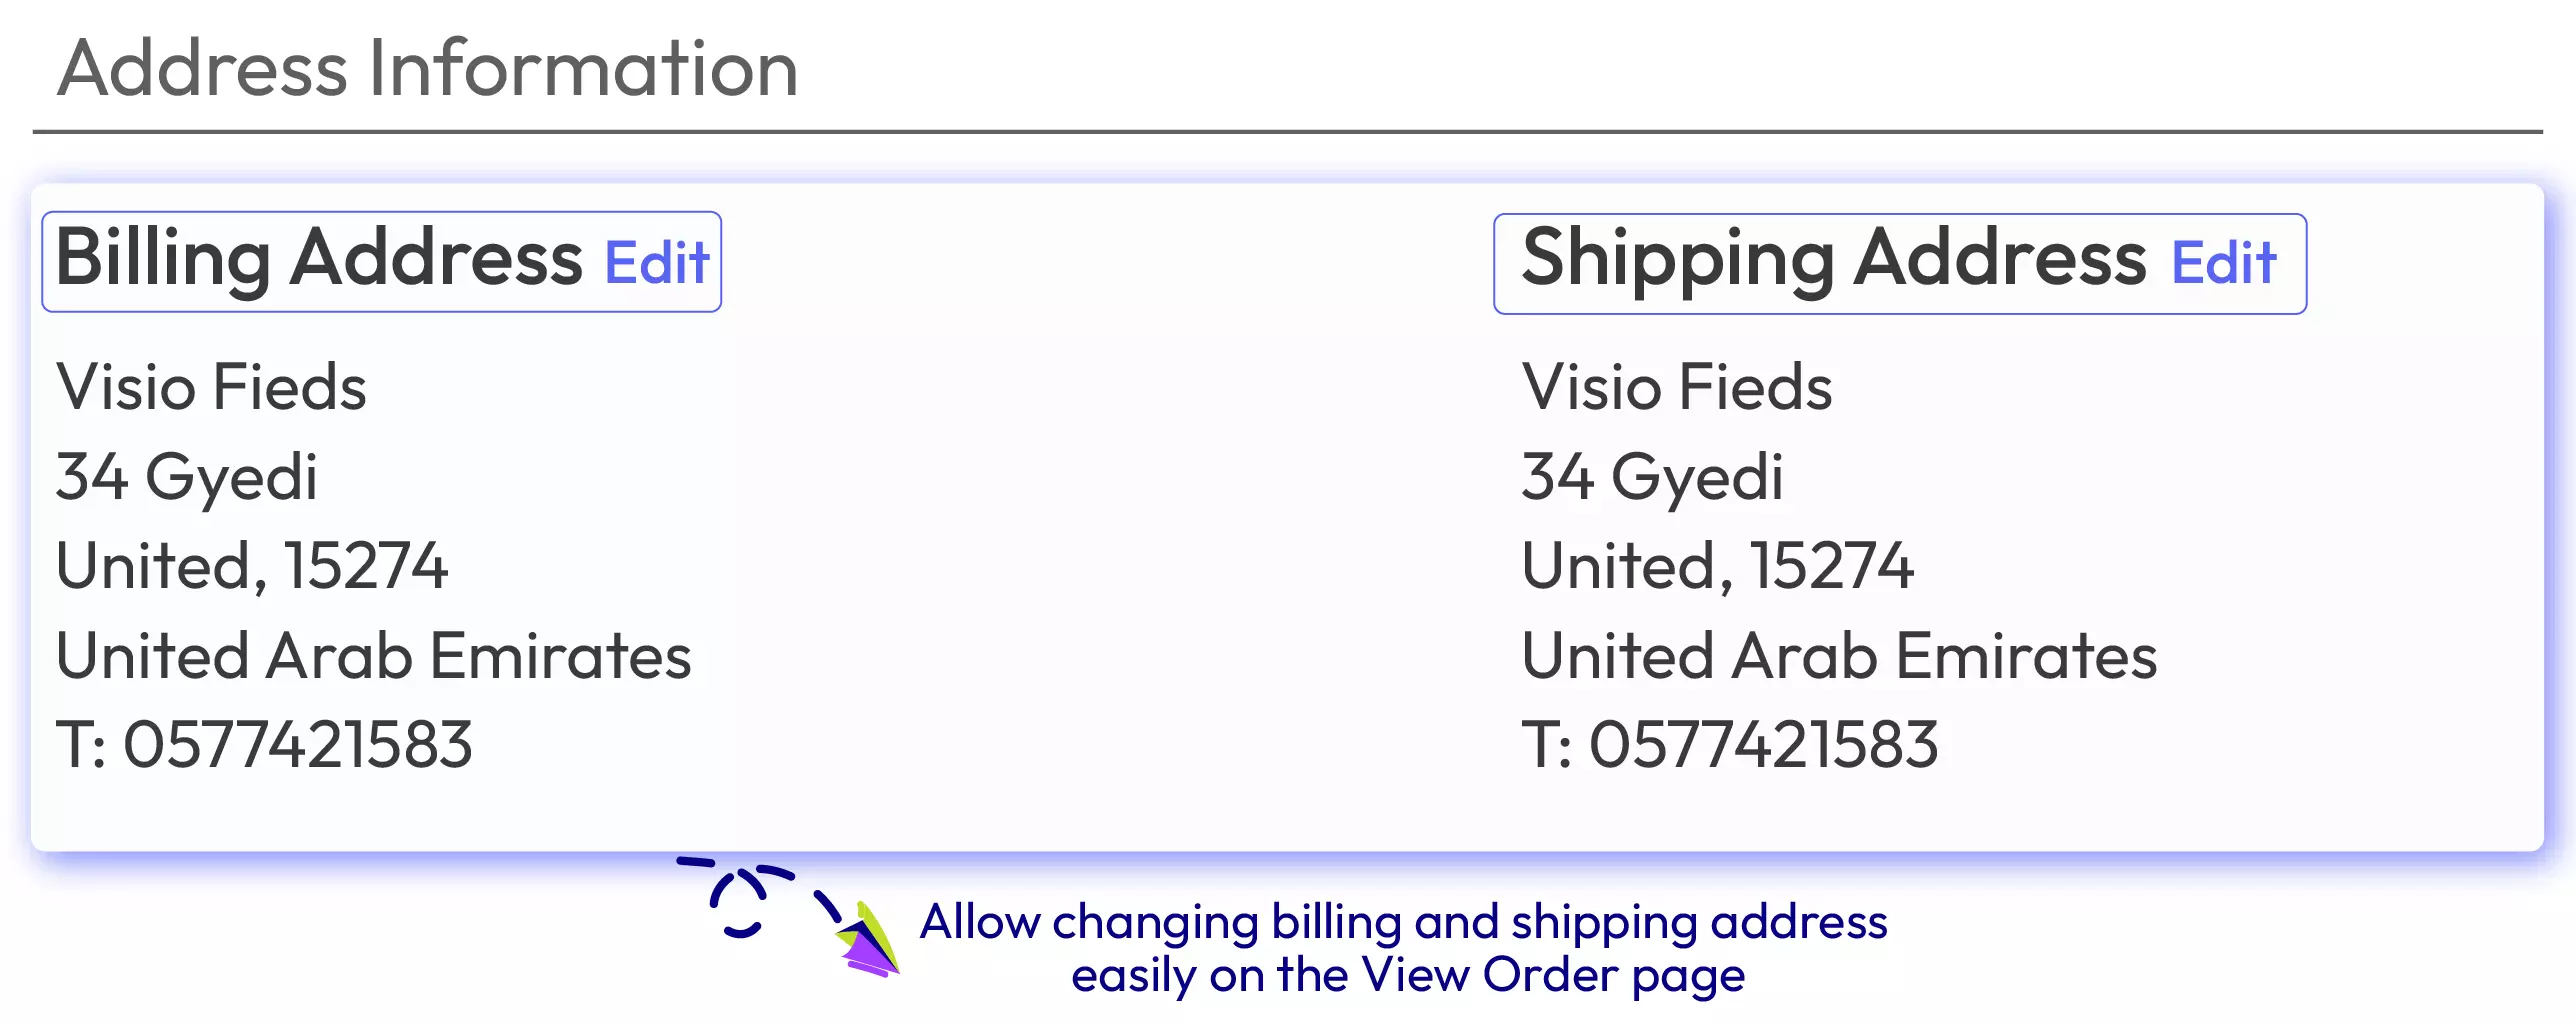 use-case3-configure-order-billing-and-shipping-address-by-extension-of-mageplaza